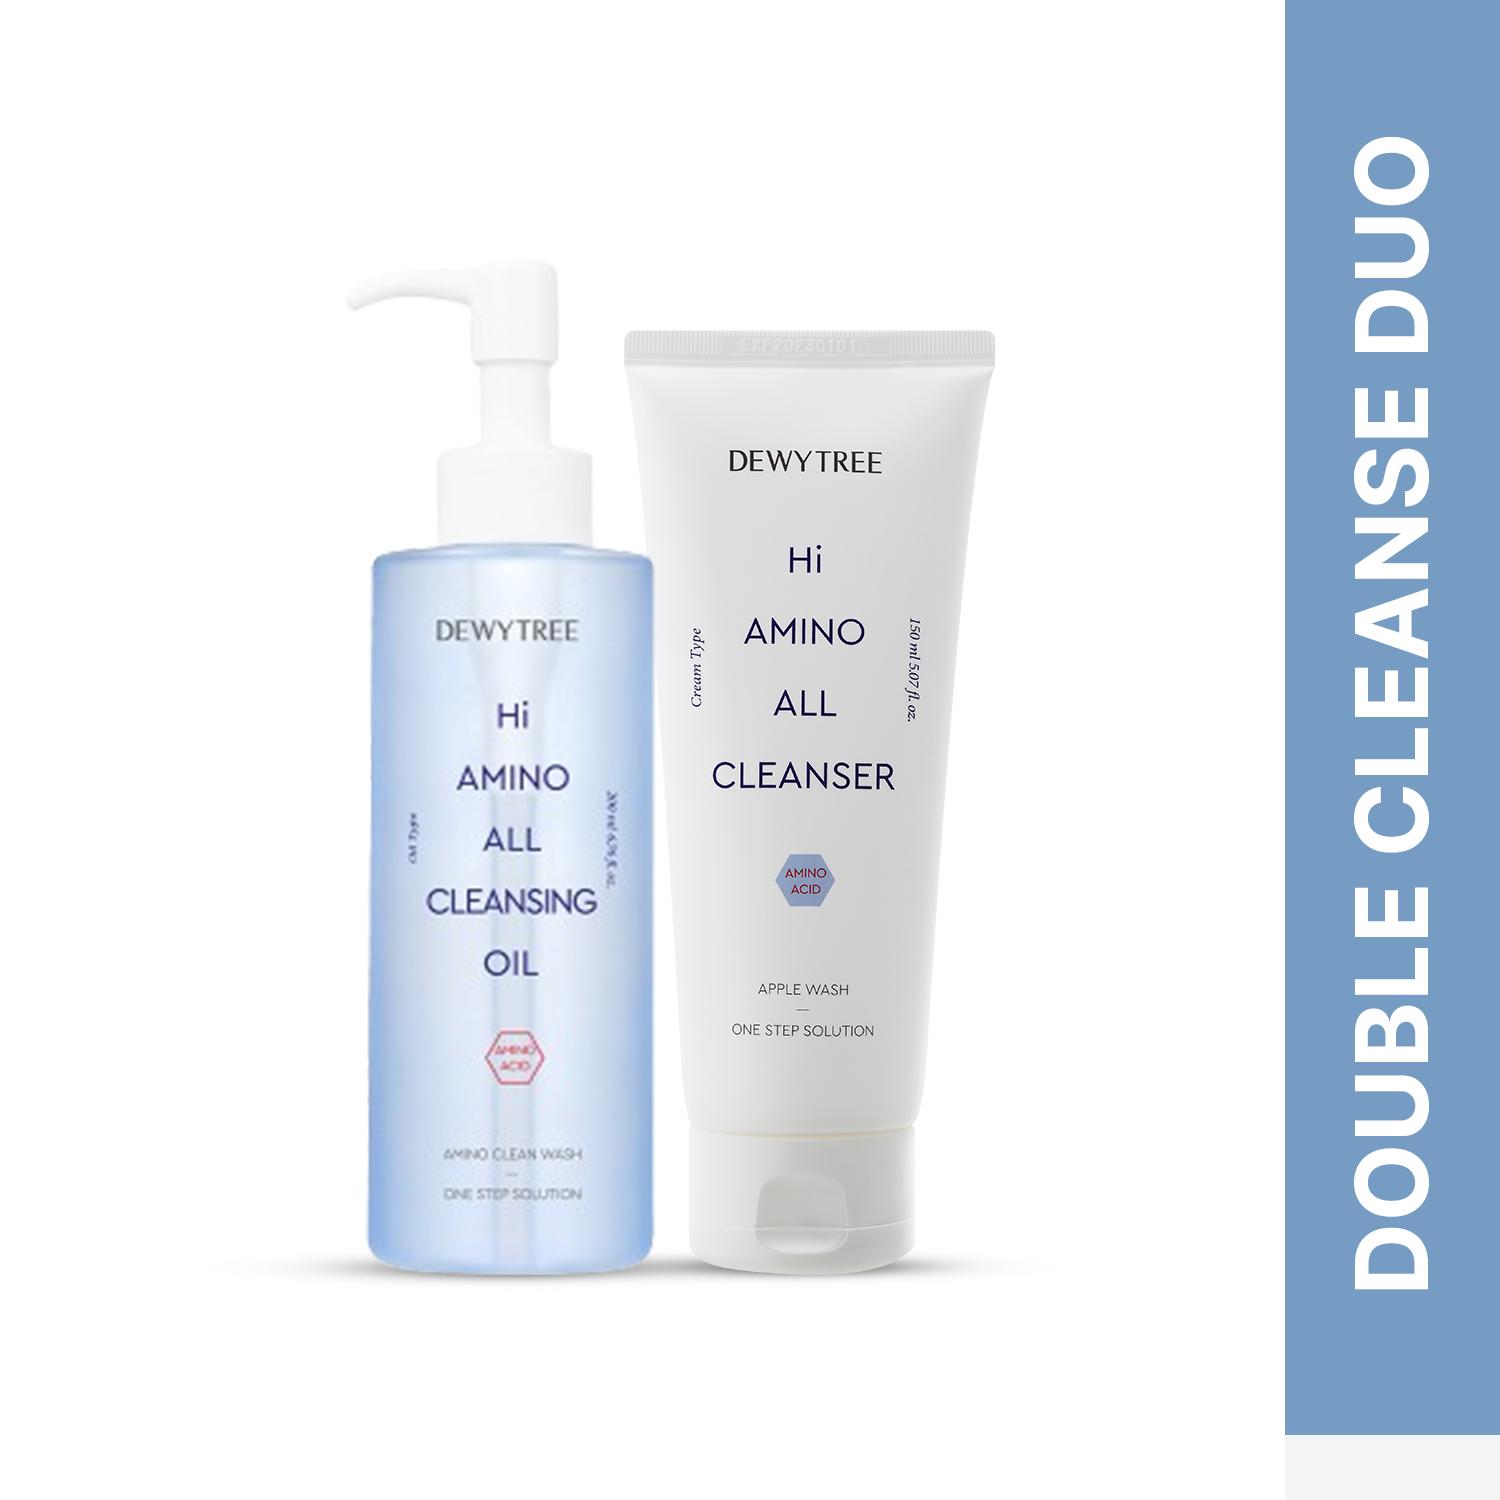 Dewytree | Dewytree Hi Amino All Cleansing Oil Duo Combo